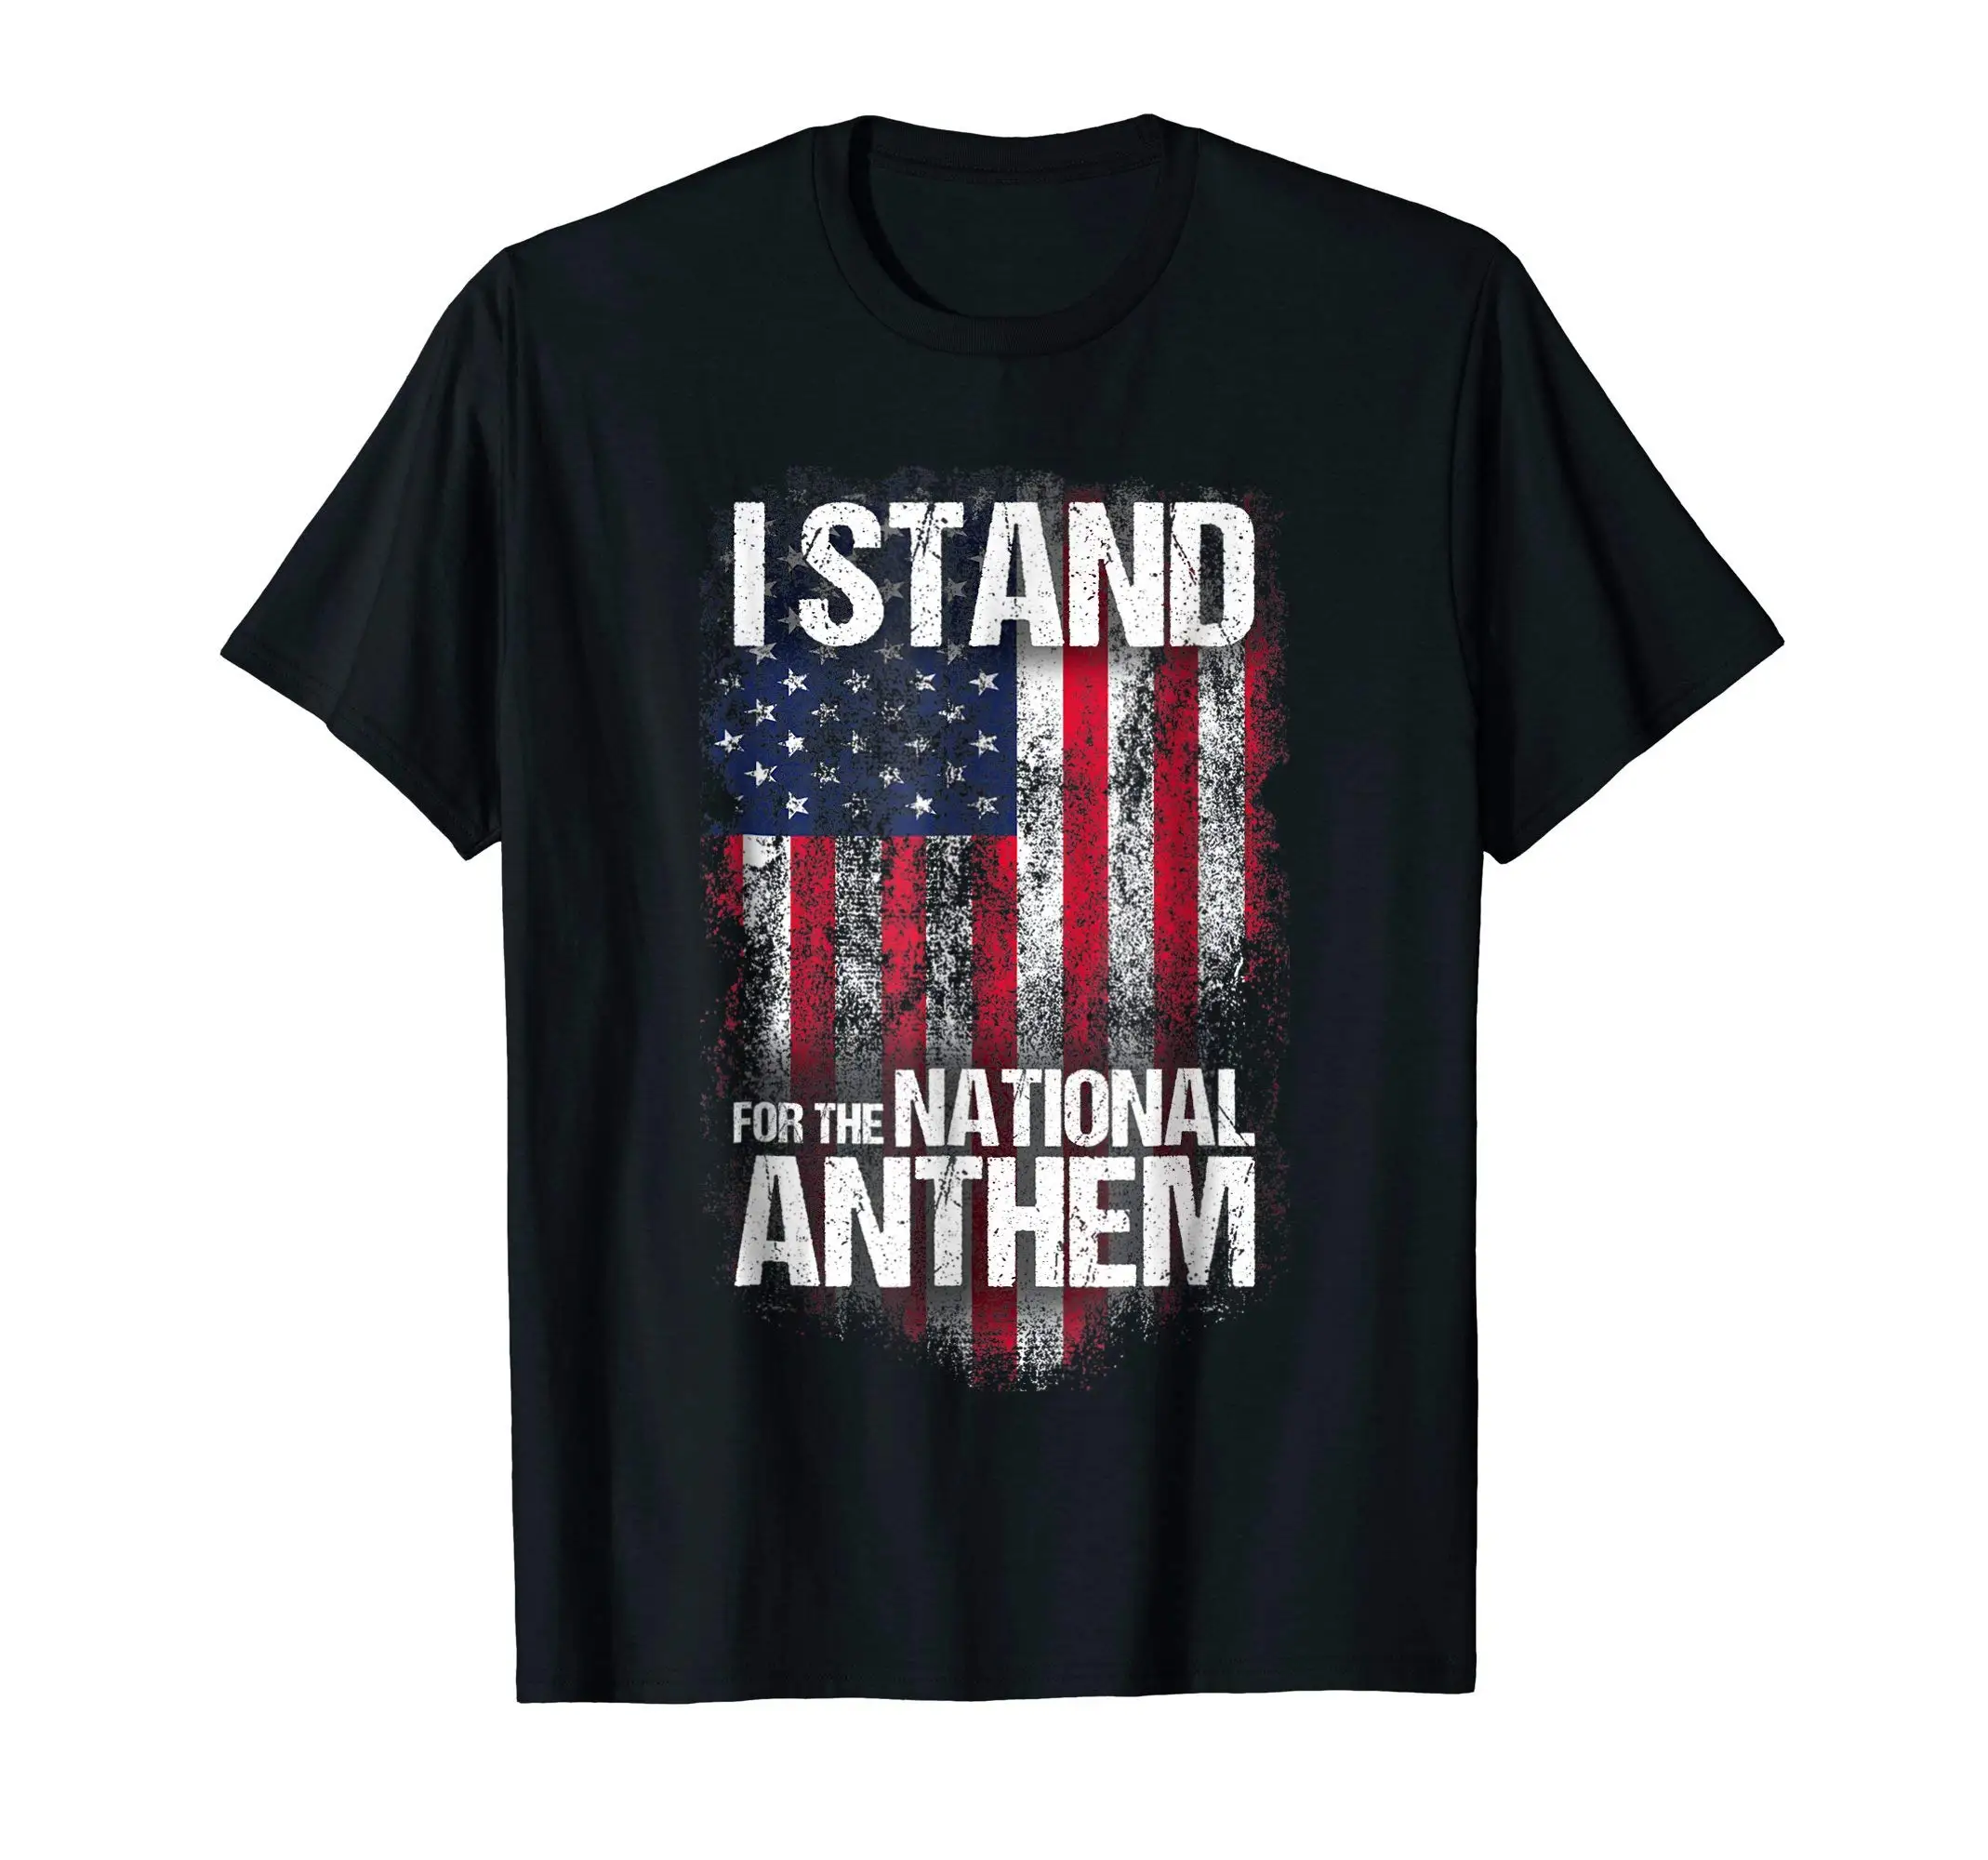 

I Stand for The National Anthem. Distressed USA Flag Adult T-Shirt Men's Summer Cotton Short Sleeve O-Neck T Shirt New S-3XL